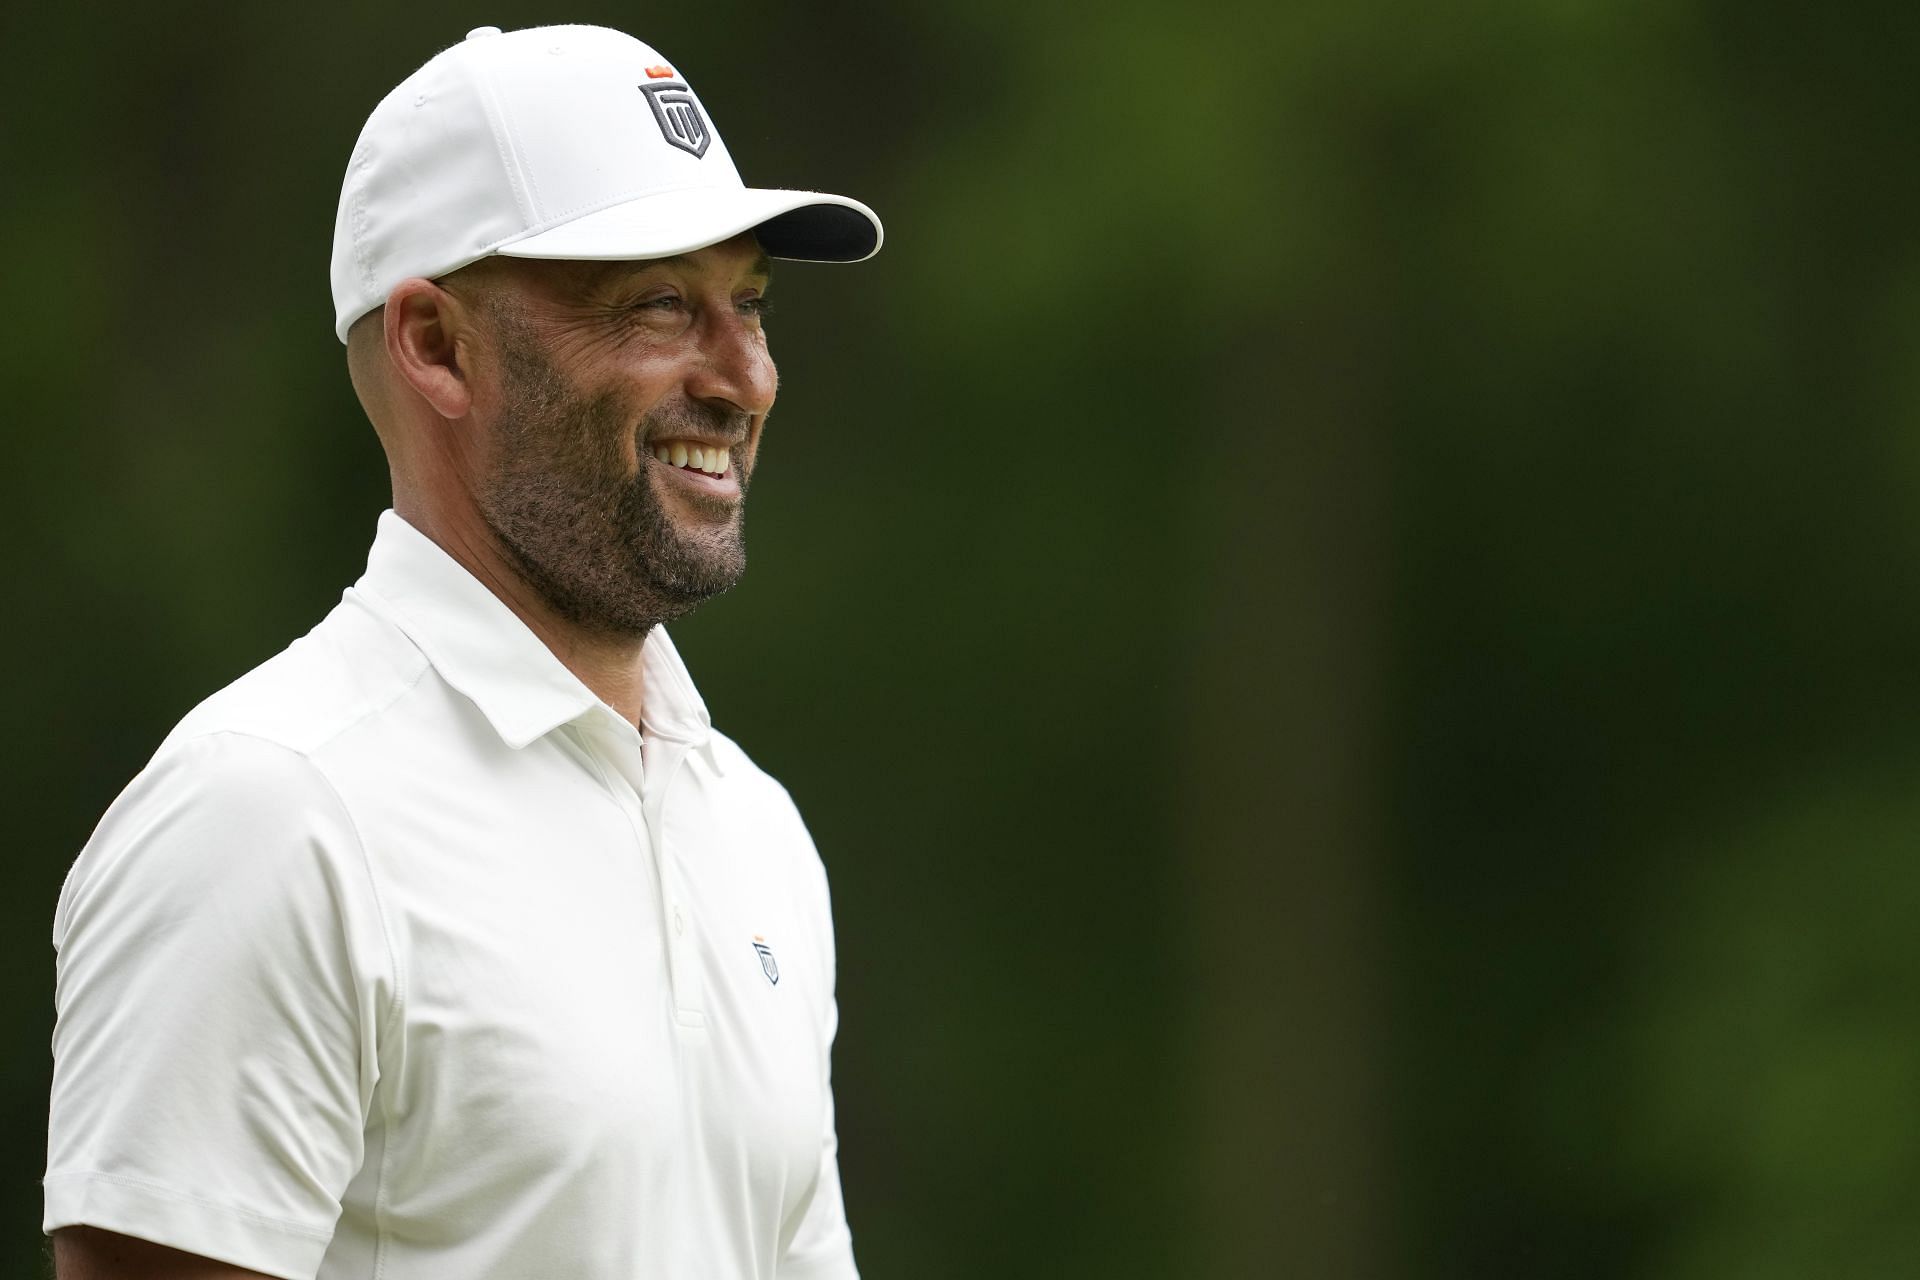 Former Yankees player Derek Jeter during the American Family Insurance Championship - Round Two